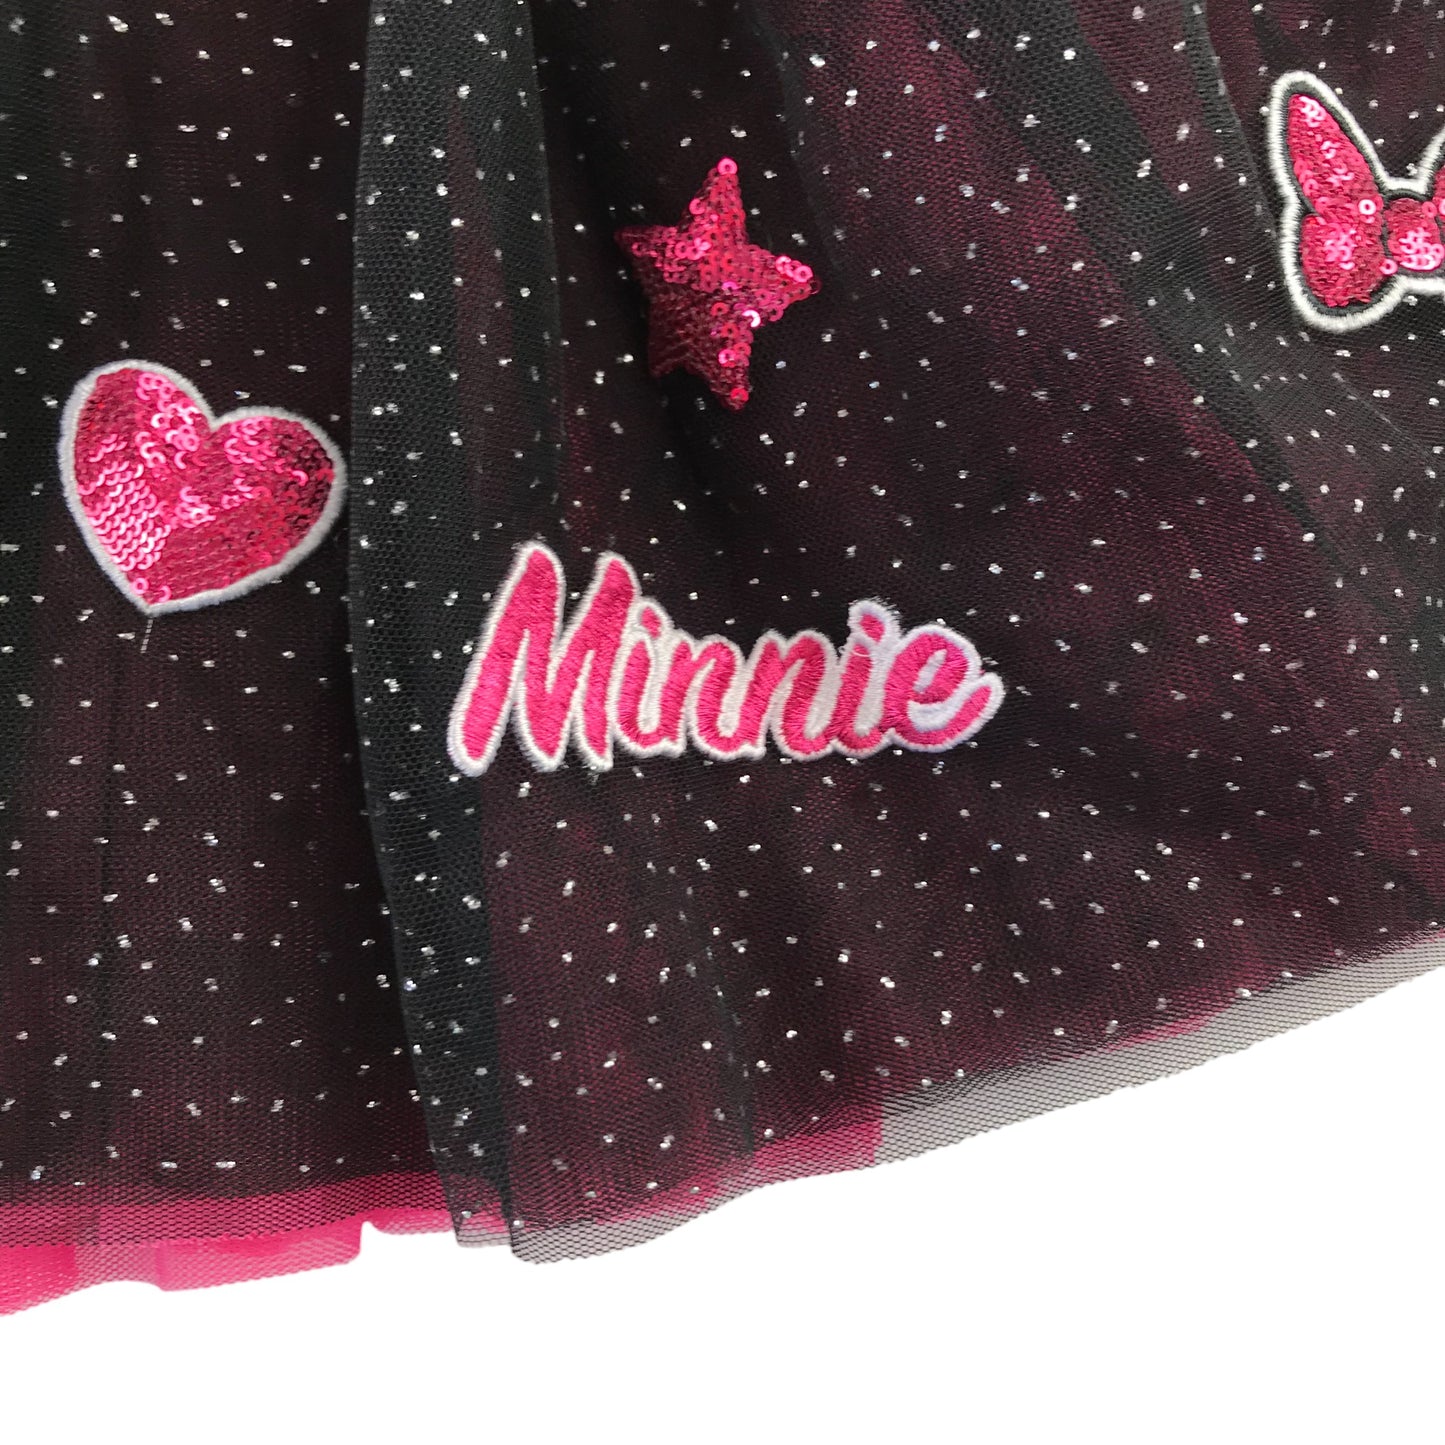 Disney Skirt 5-6 years black and pink mesh layered Minnie Mouse